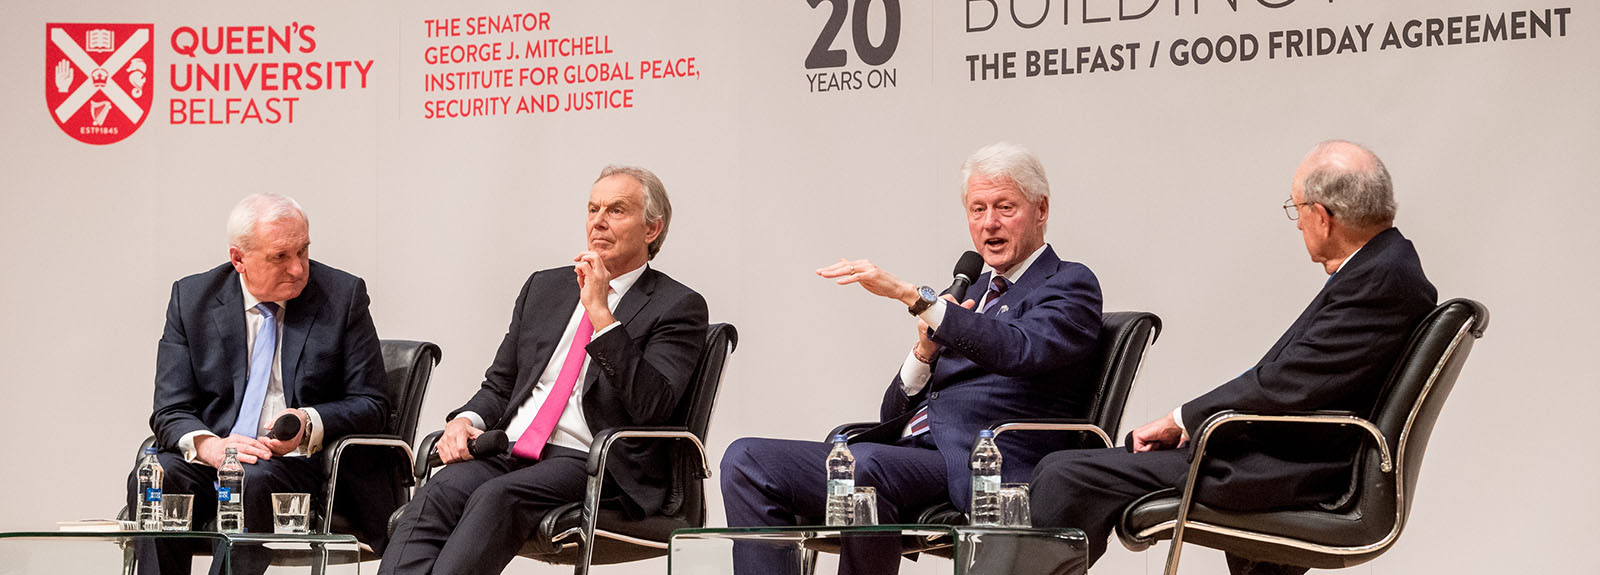 Bertie Ahern, Tony Blair, Bill Clinton, George Mitchell on stage for the Good Friday Talk